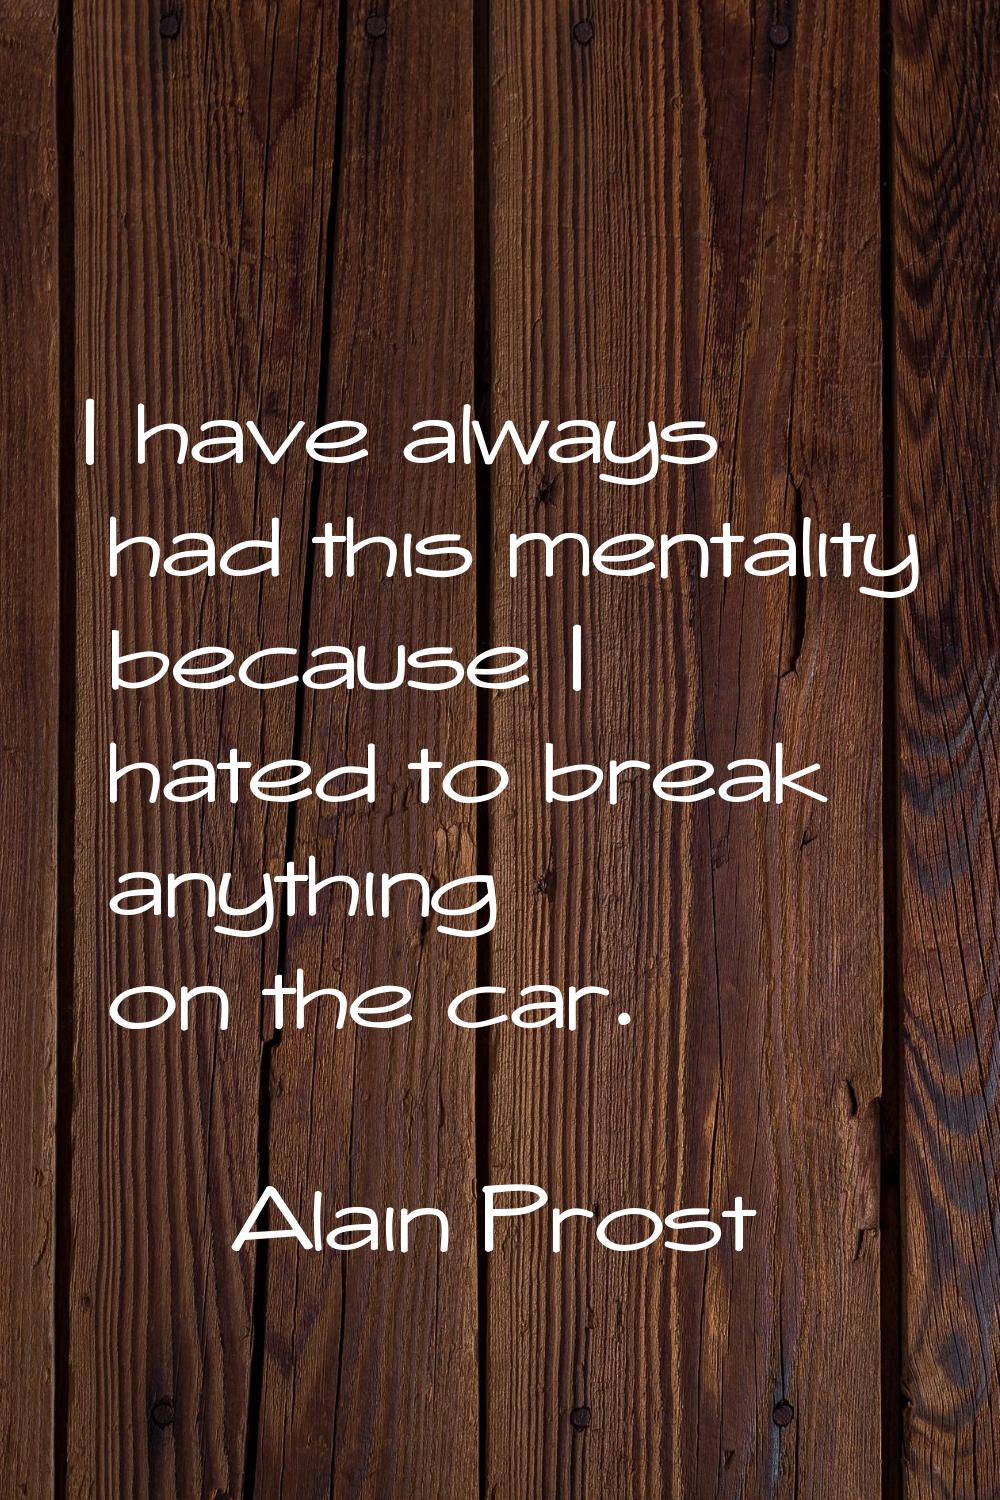 I have always had this mentality because I hated to break anything on the car.